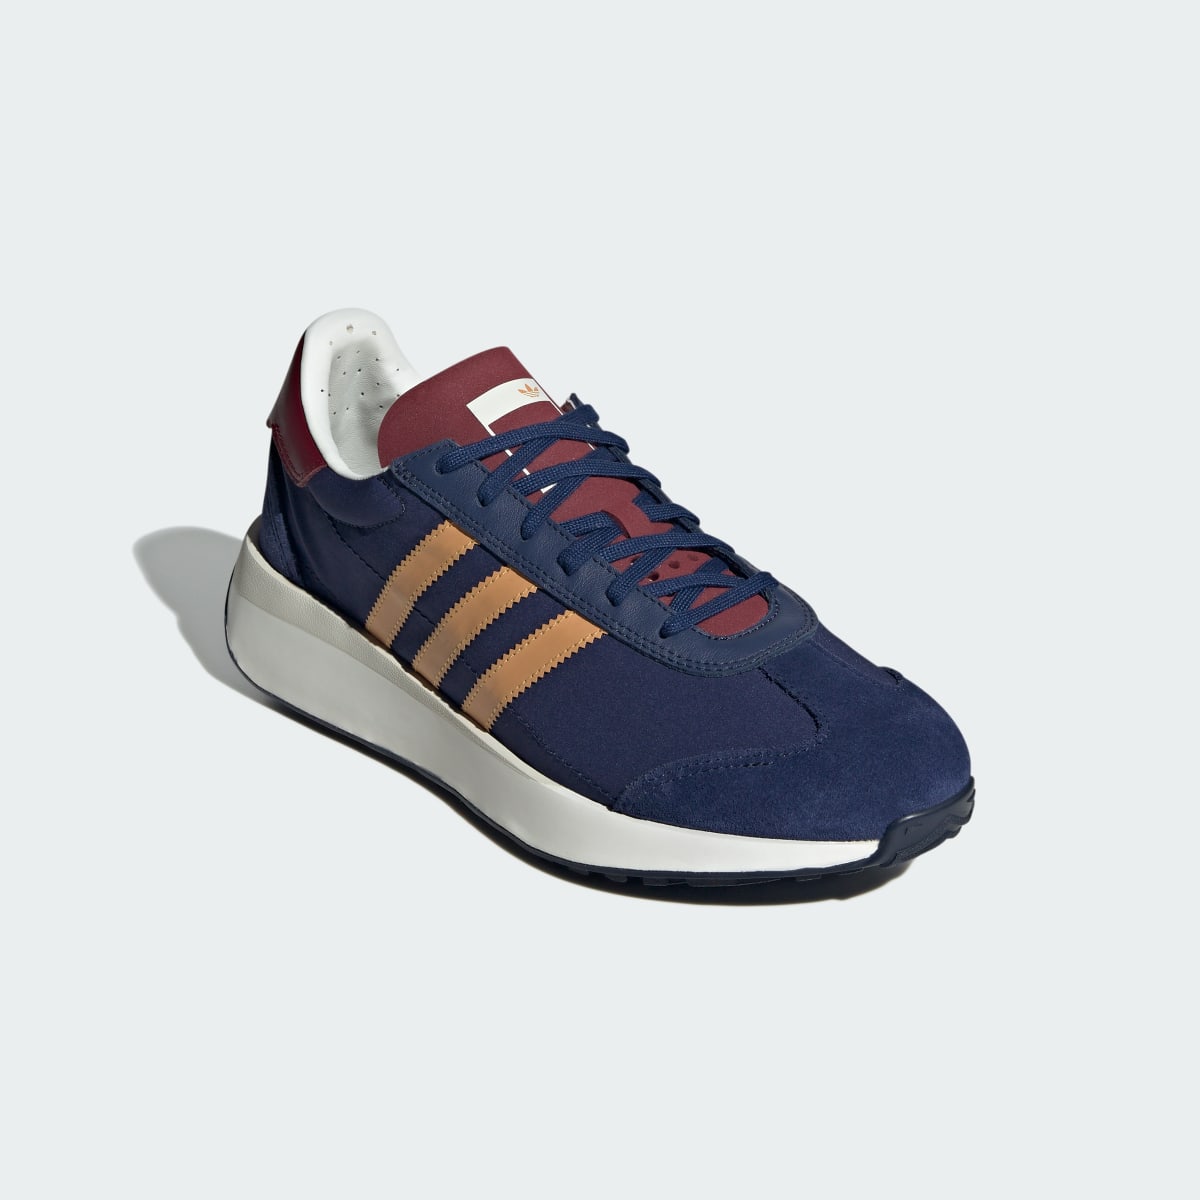 Adidas COUNTRY XLG. 8